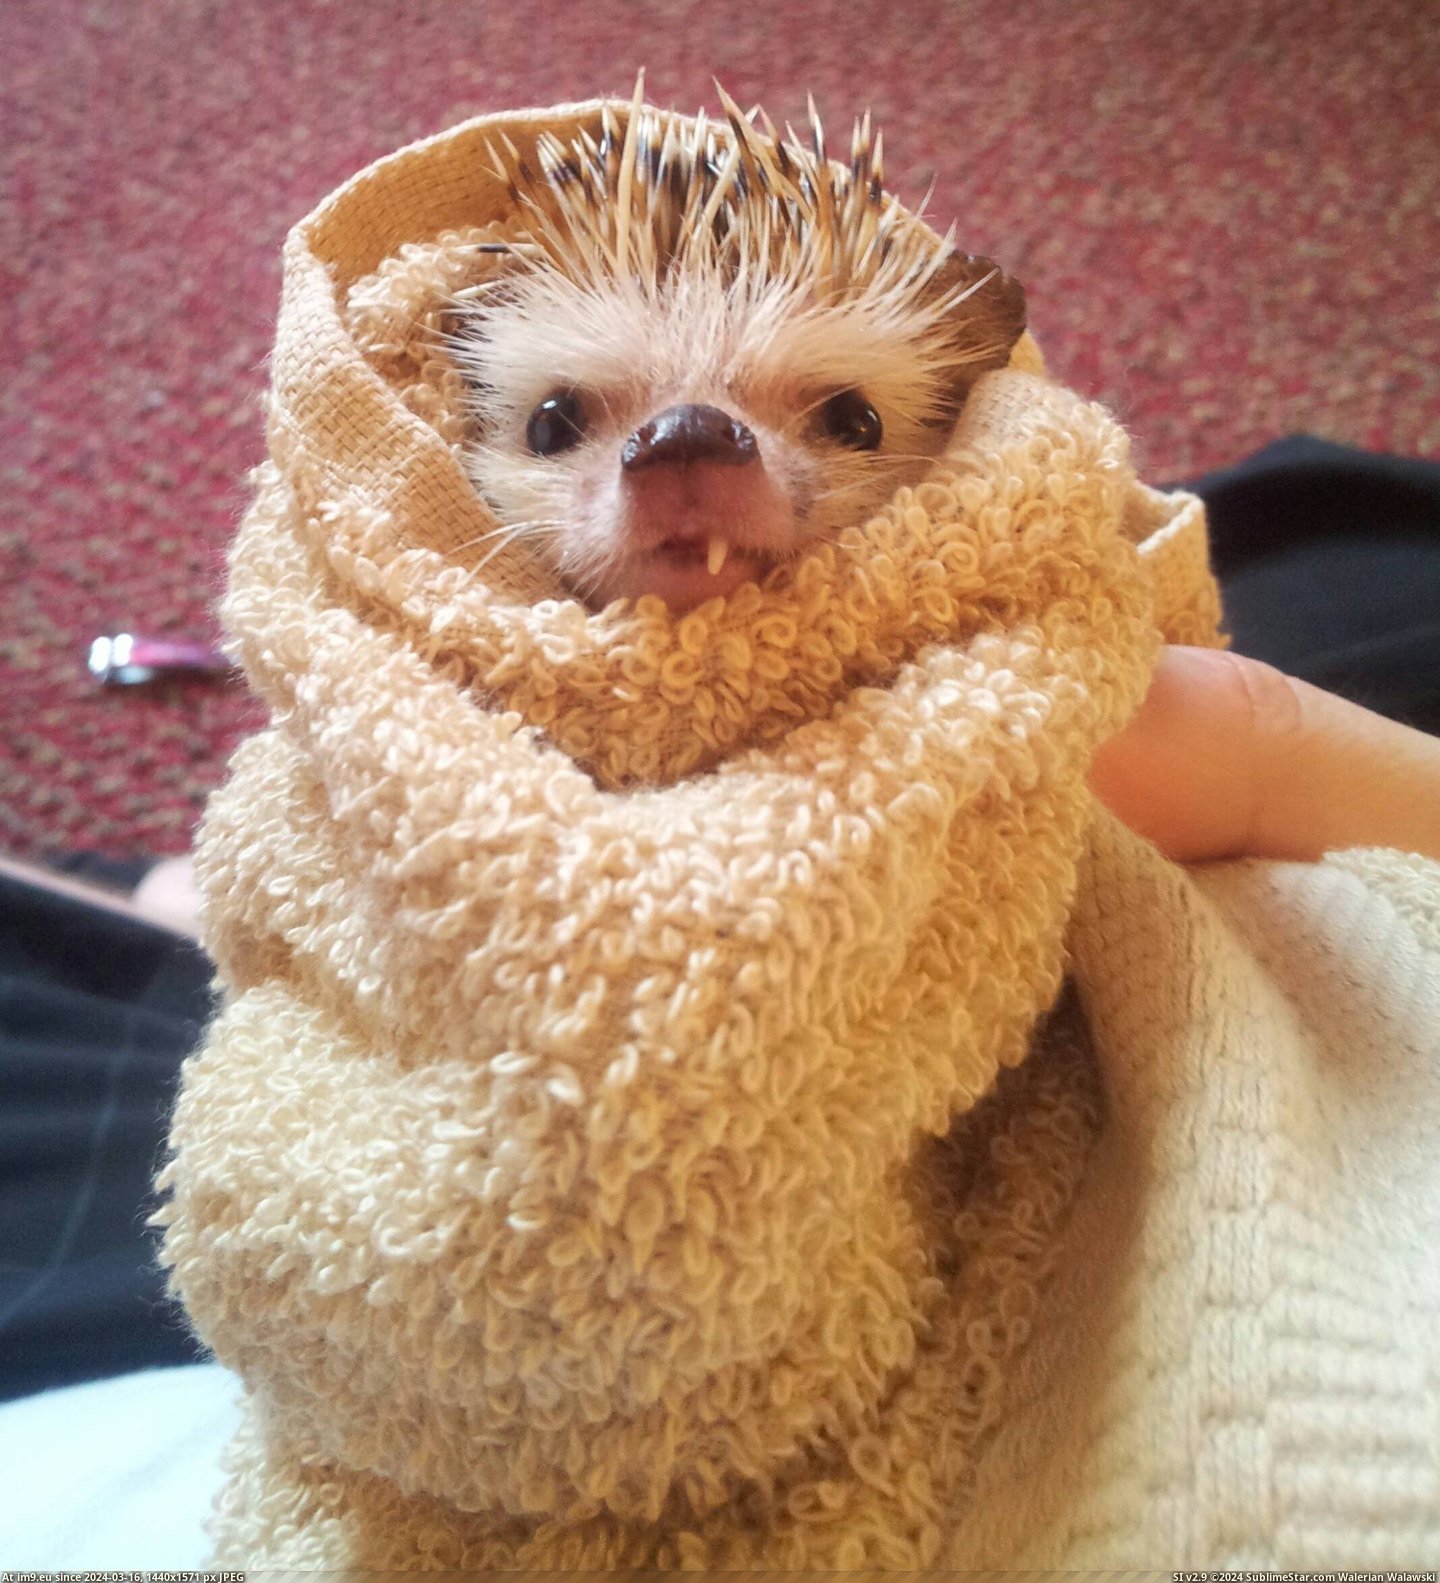 #One #Night #People #Hedgehog #Scraggly #Toothed #Lot #Bath #Enjoyed [Aww] Since a lot of people enjoyed the scraggly one toothed hedgehog here he is after his bath last night. Pic. (Изображение из альбом My r/AWW favs))